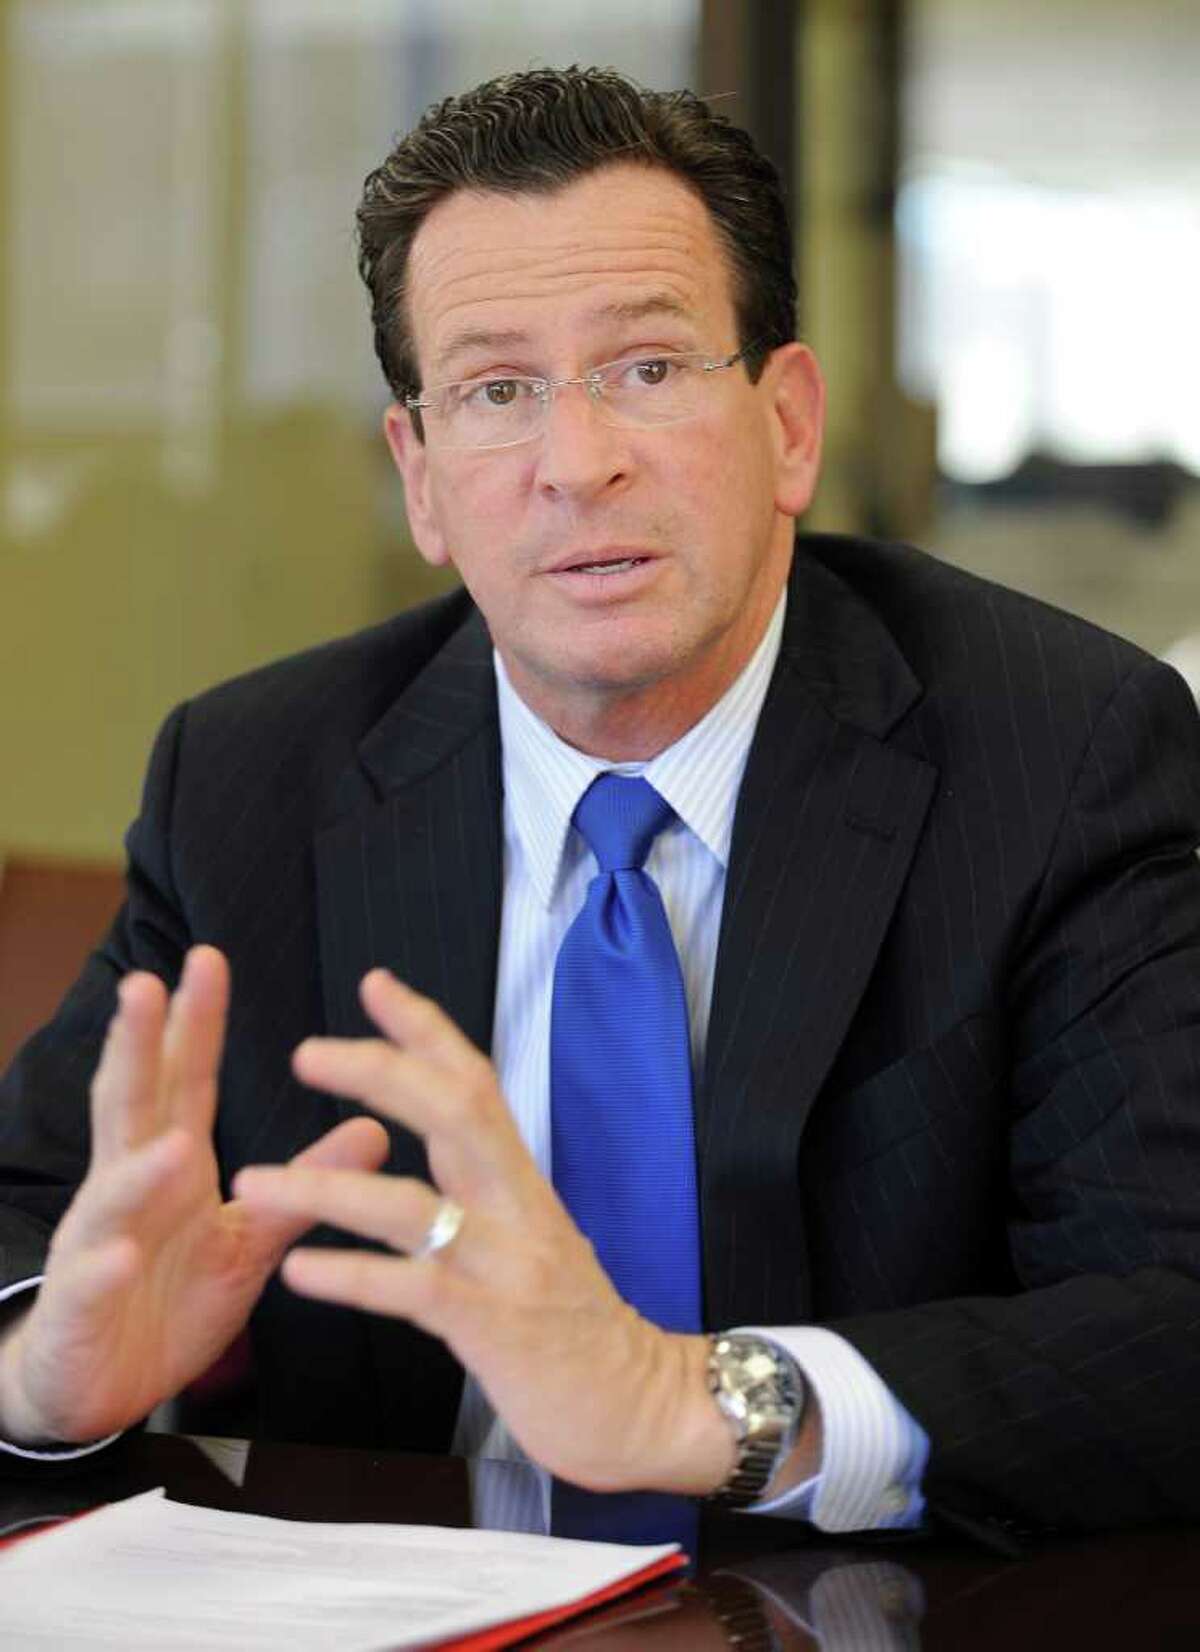 Gov. Dannel P. Malloy answers questions during an editorial board interview at the Connecticut Post in Bridgeport, Conn. Thursday, Feb. 03, 2011.